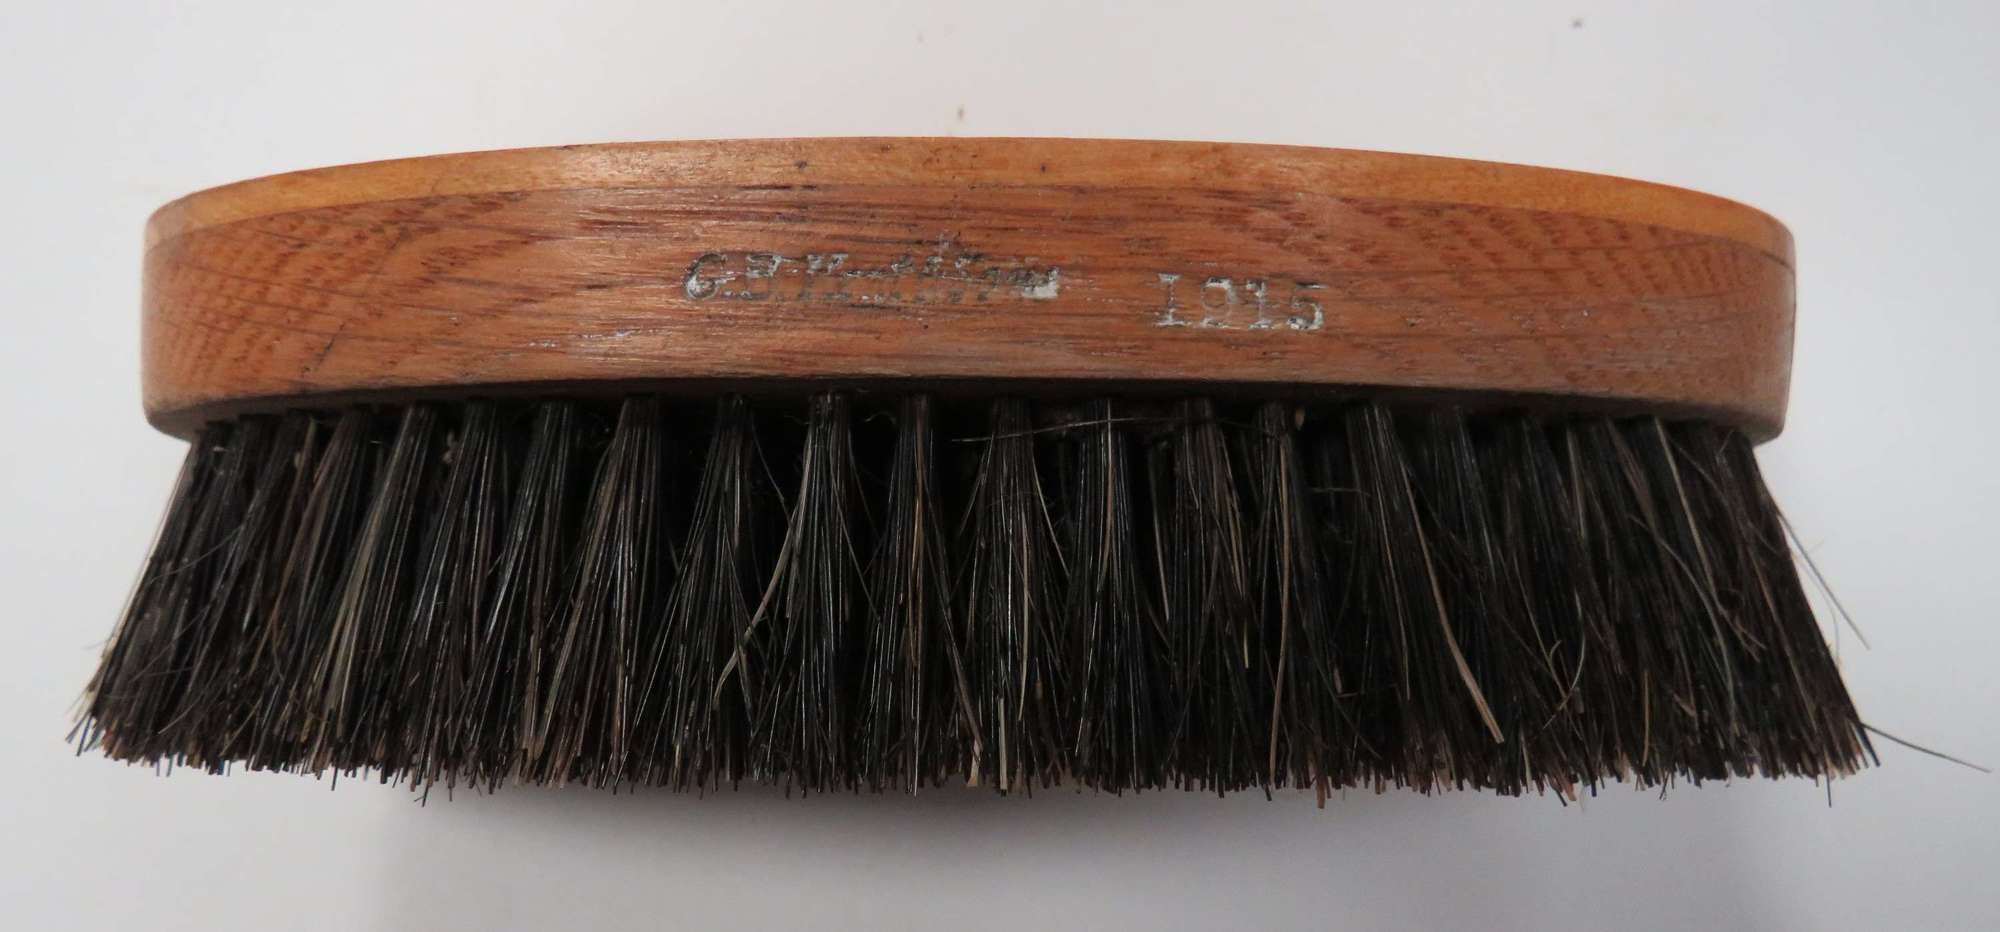 1915 Dated Issue Military Brush